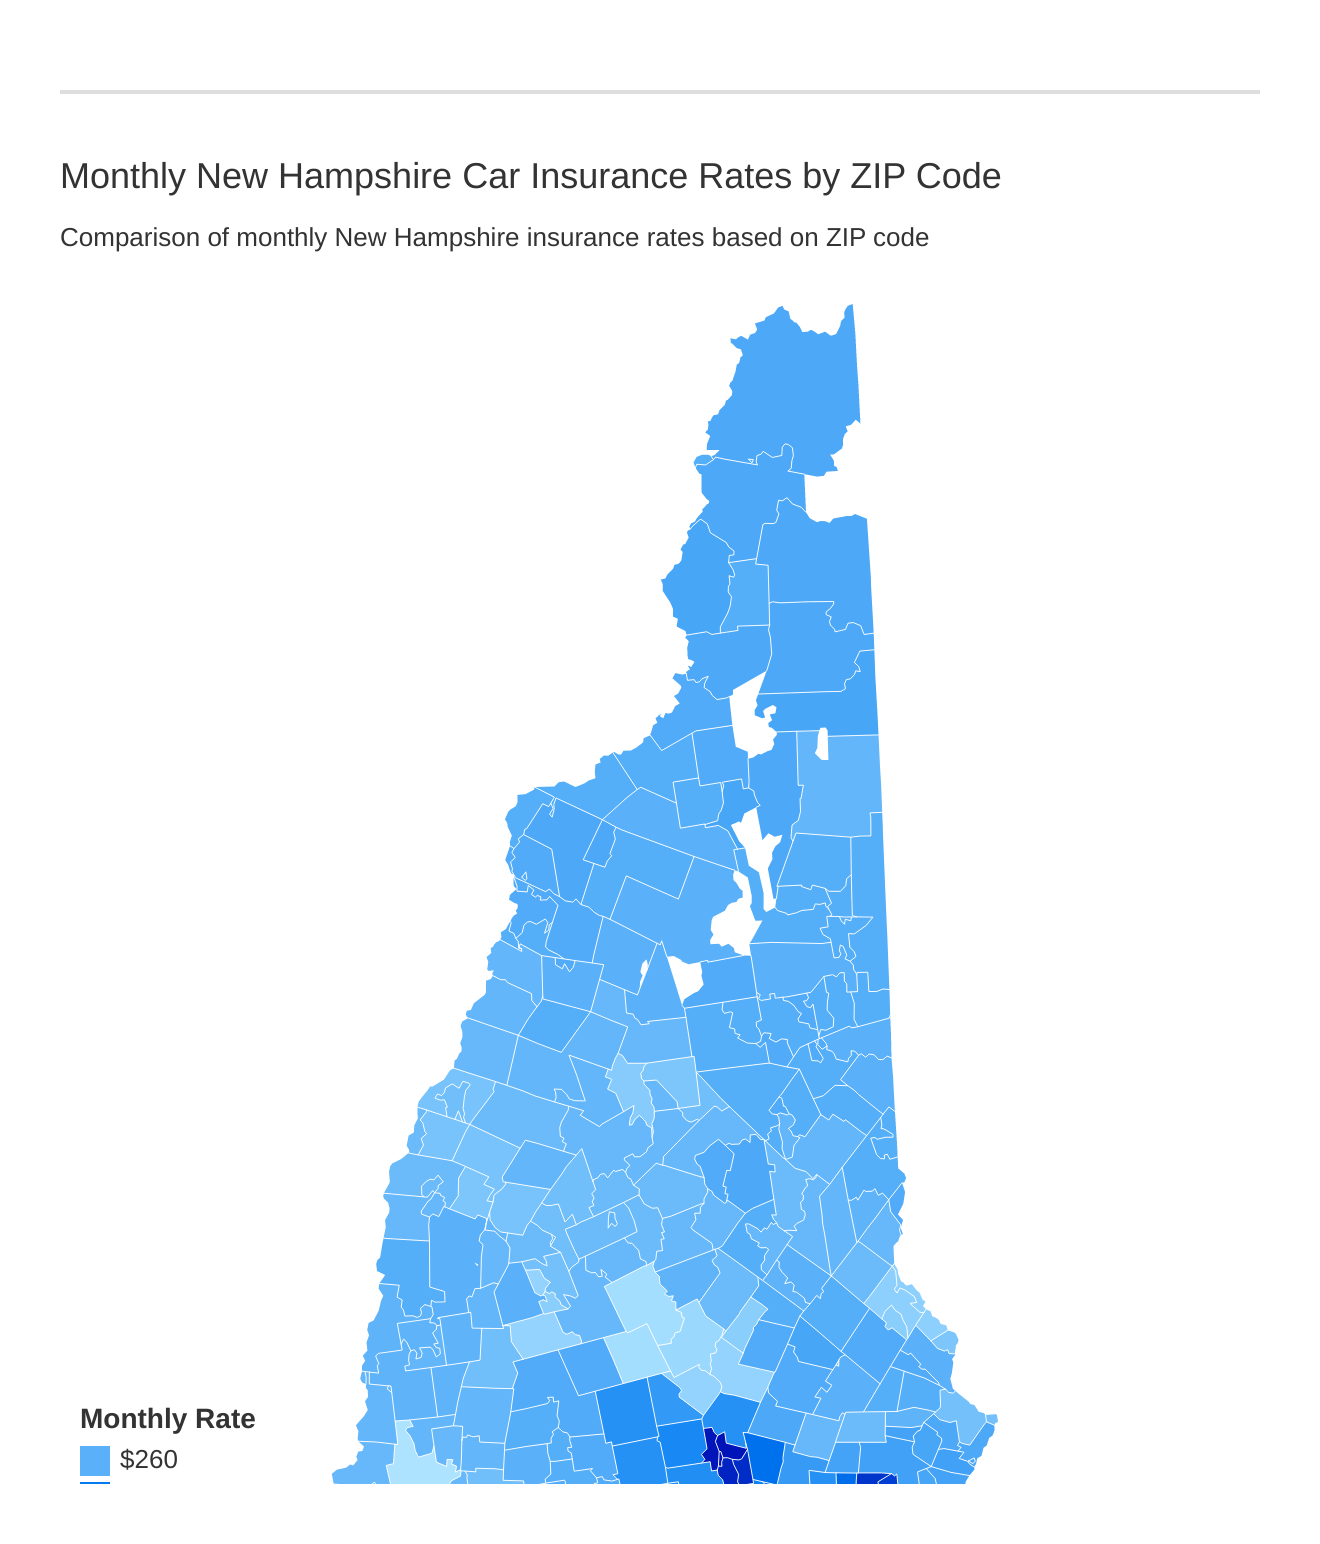 Monthly New Hampshire Car Insurance Rates by ZIP Code